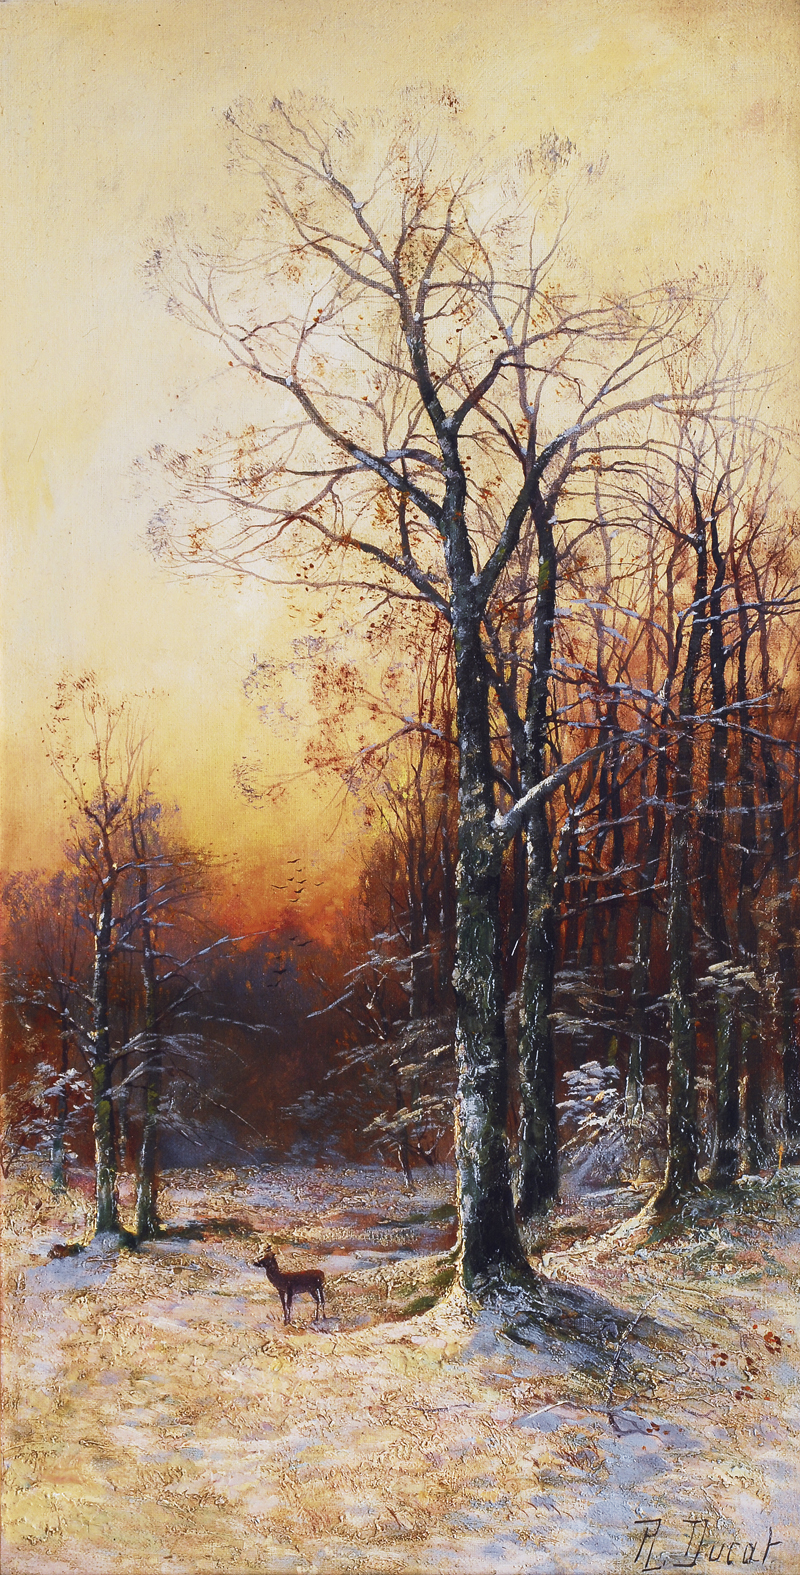 A winter landscape with a deer